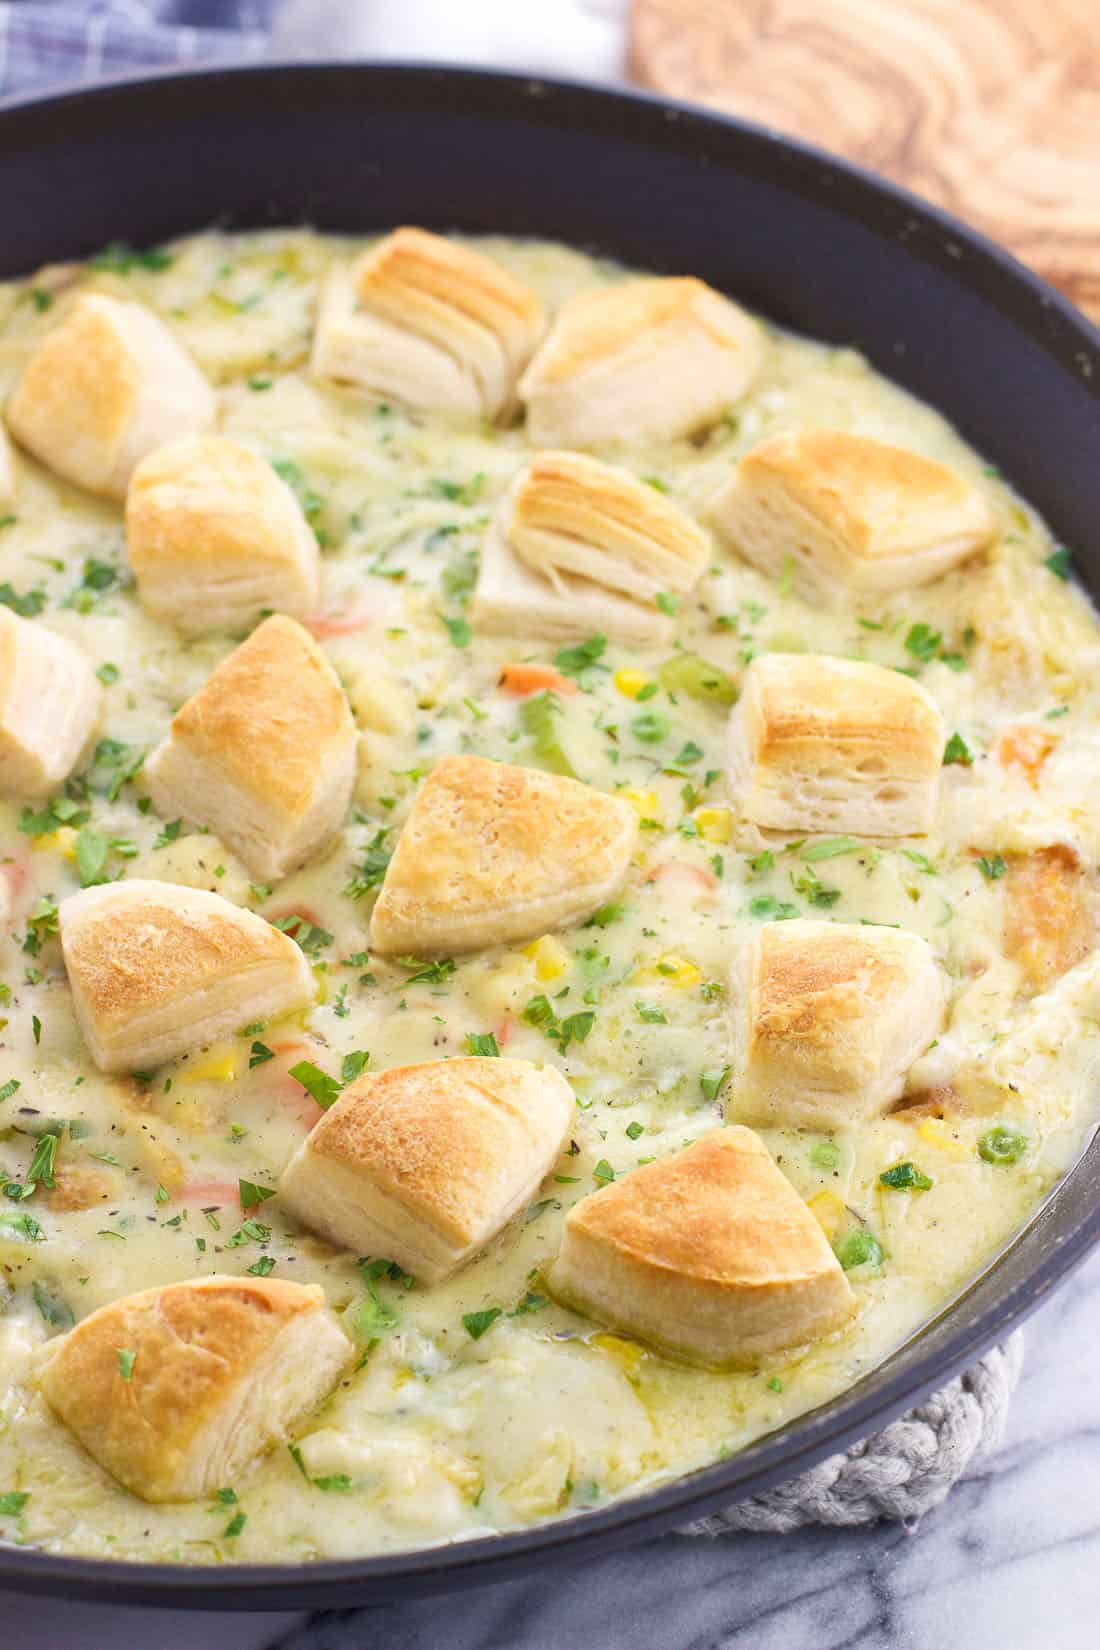 The skillet pot pie topped with cooked biscuit segments ready to be served